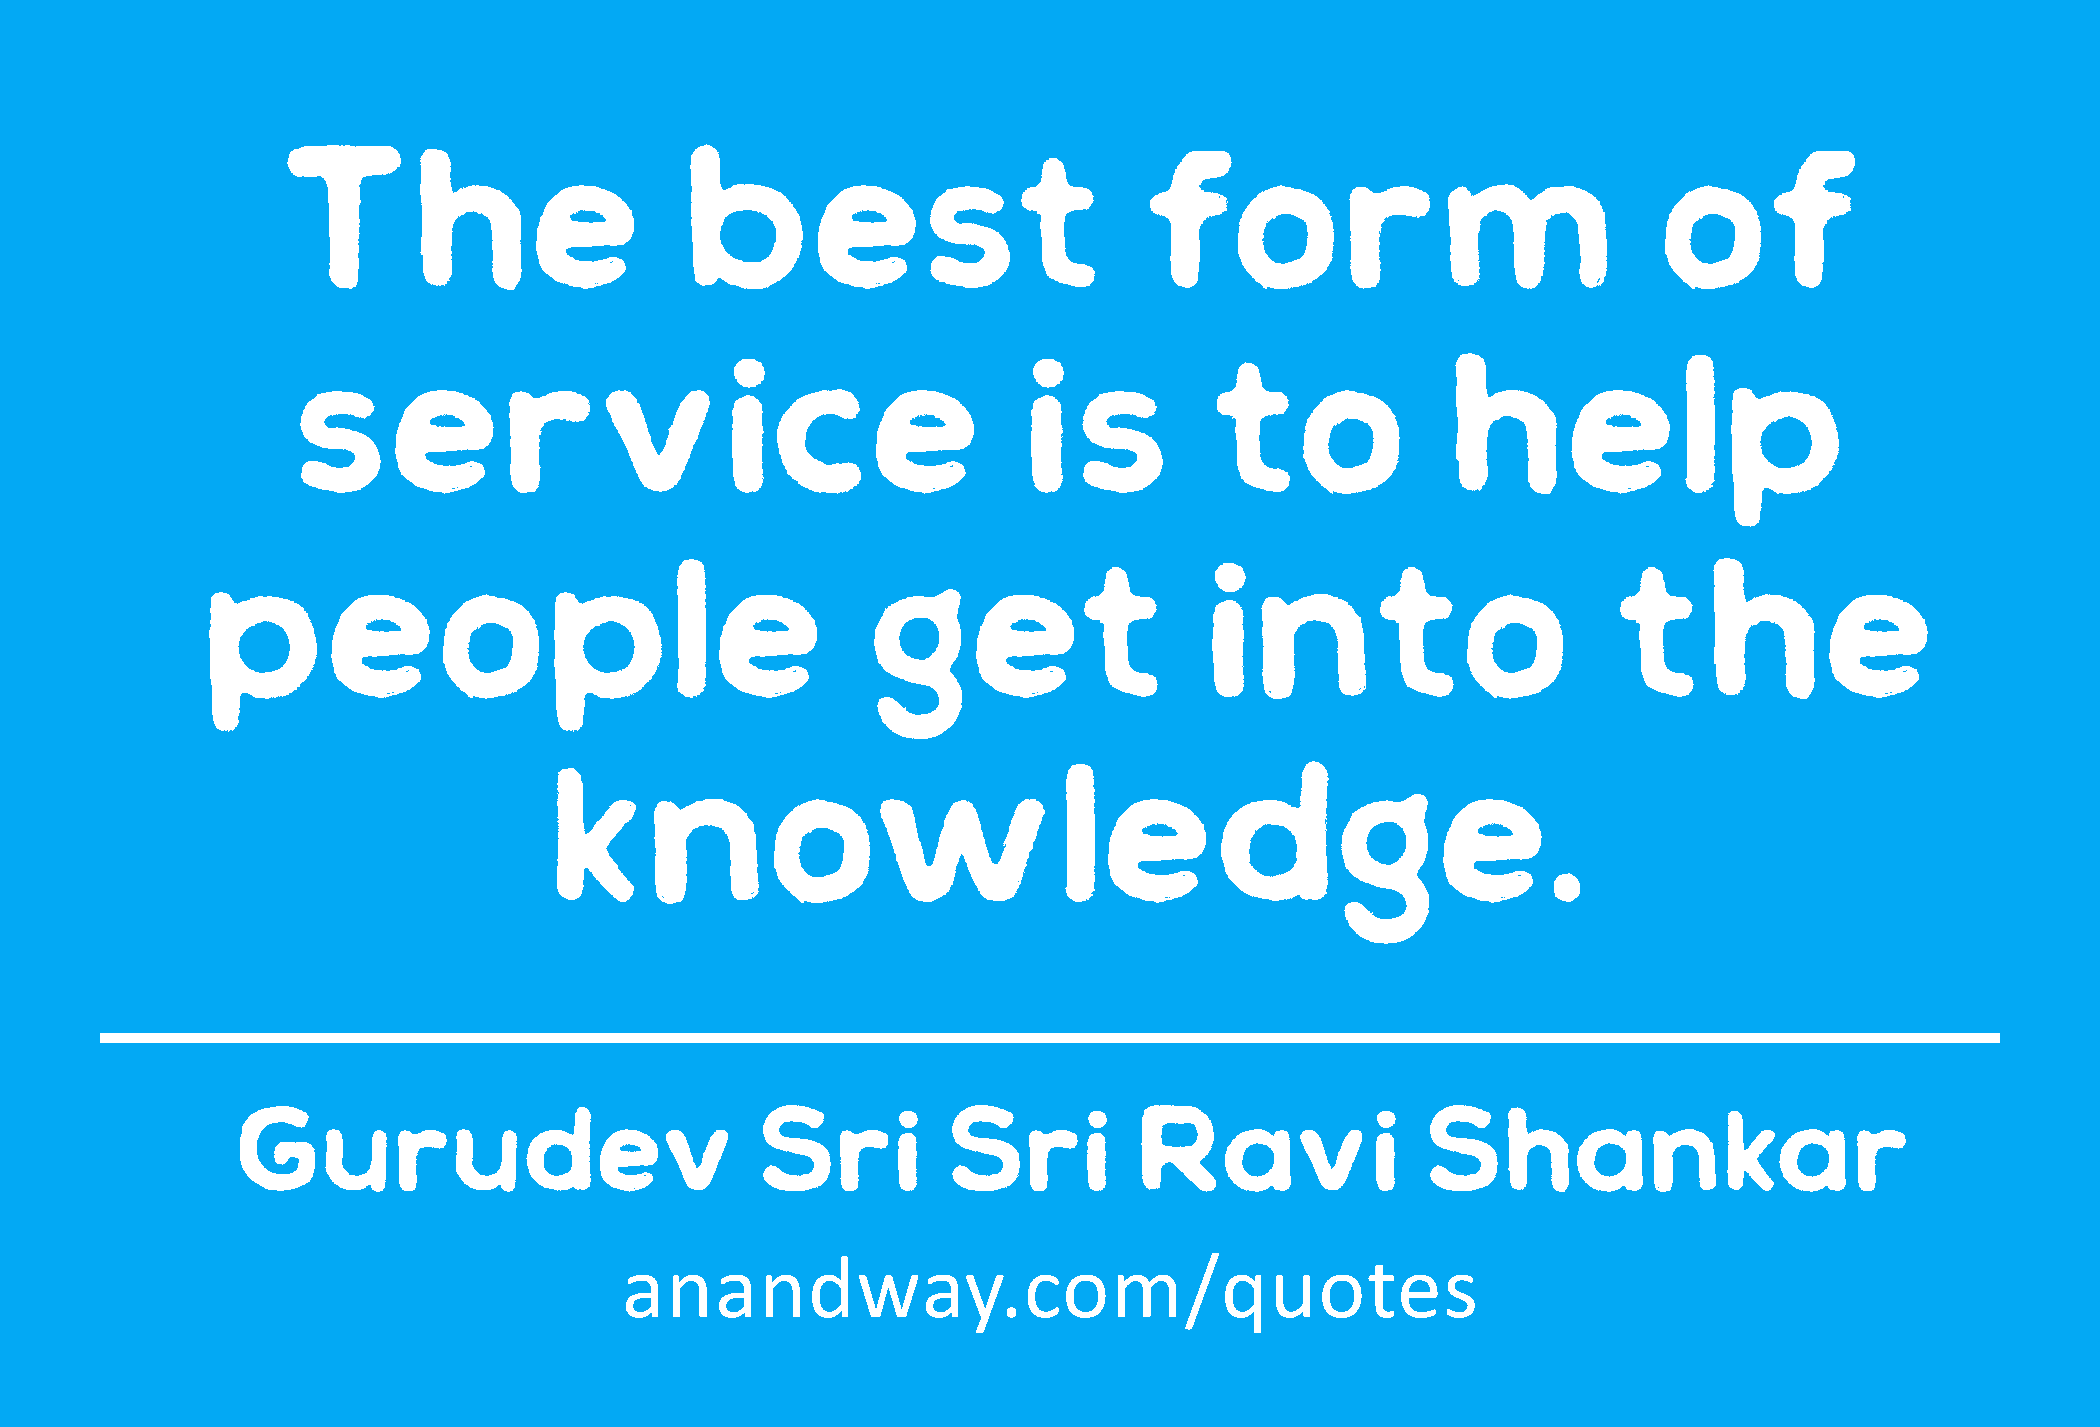 The best form of service is to help people get into the knowledge. 
 -Gurudev Sri Sri Ravi Shankar